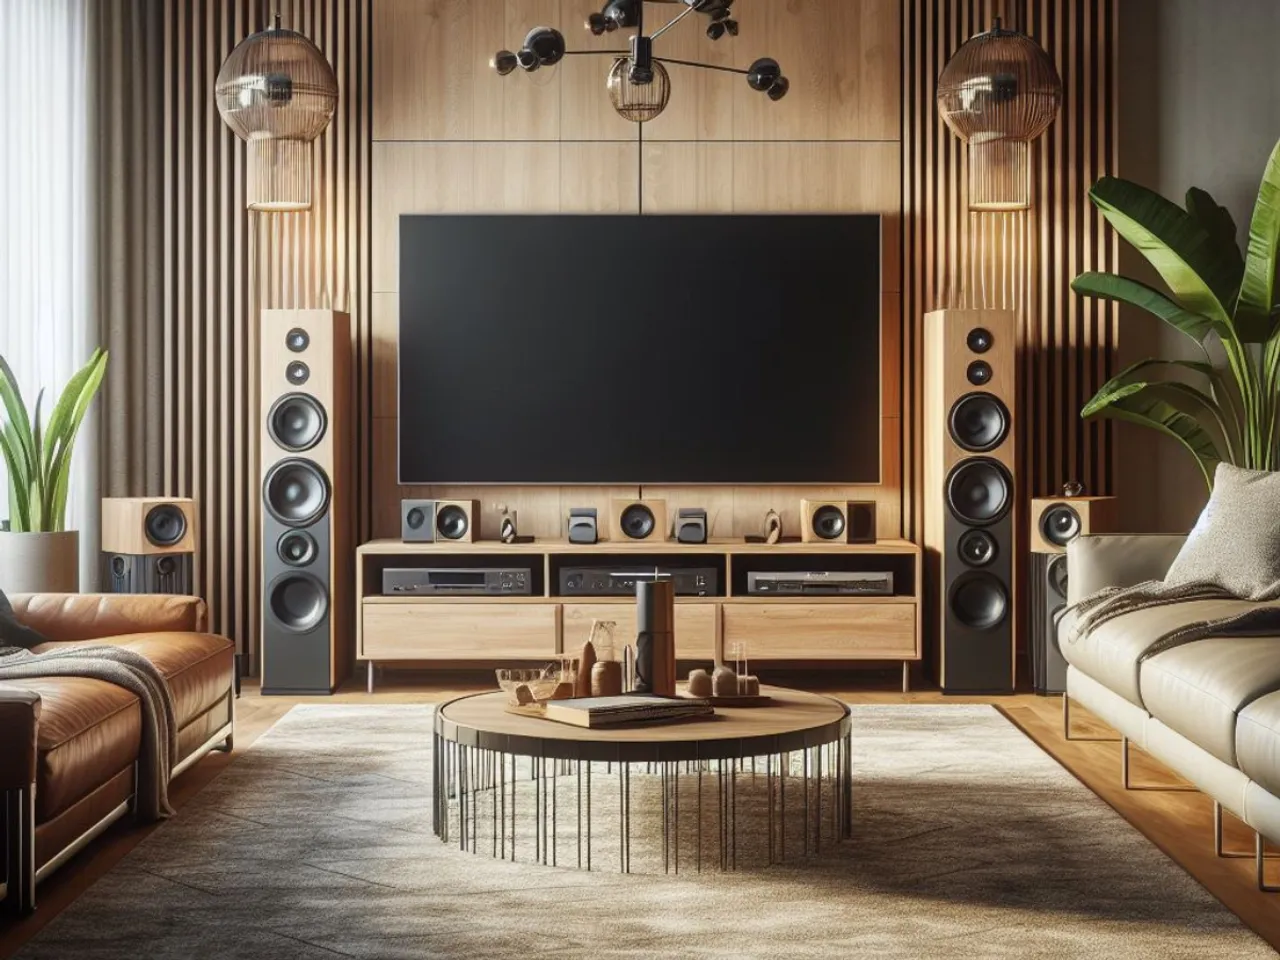 Top 8 Floorstanding Speakers For Music and Home Theatre